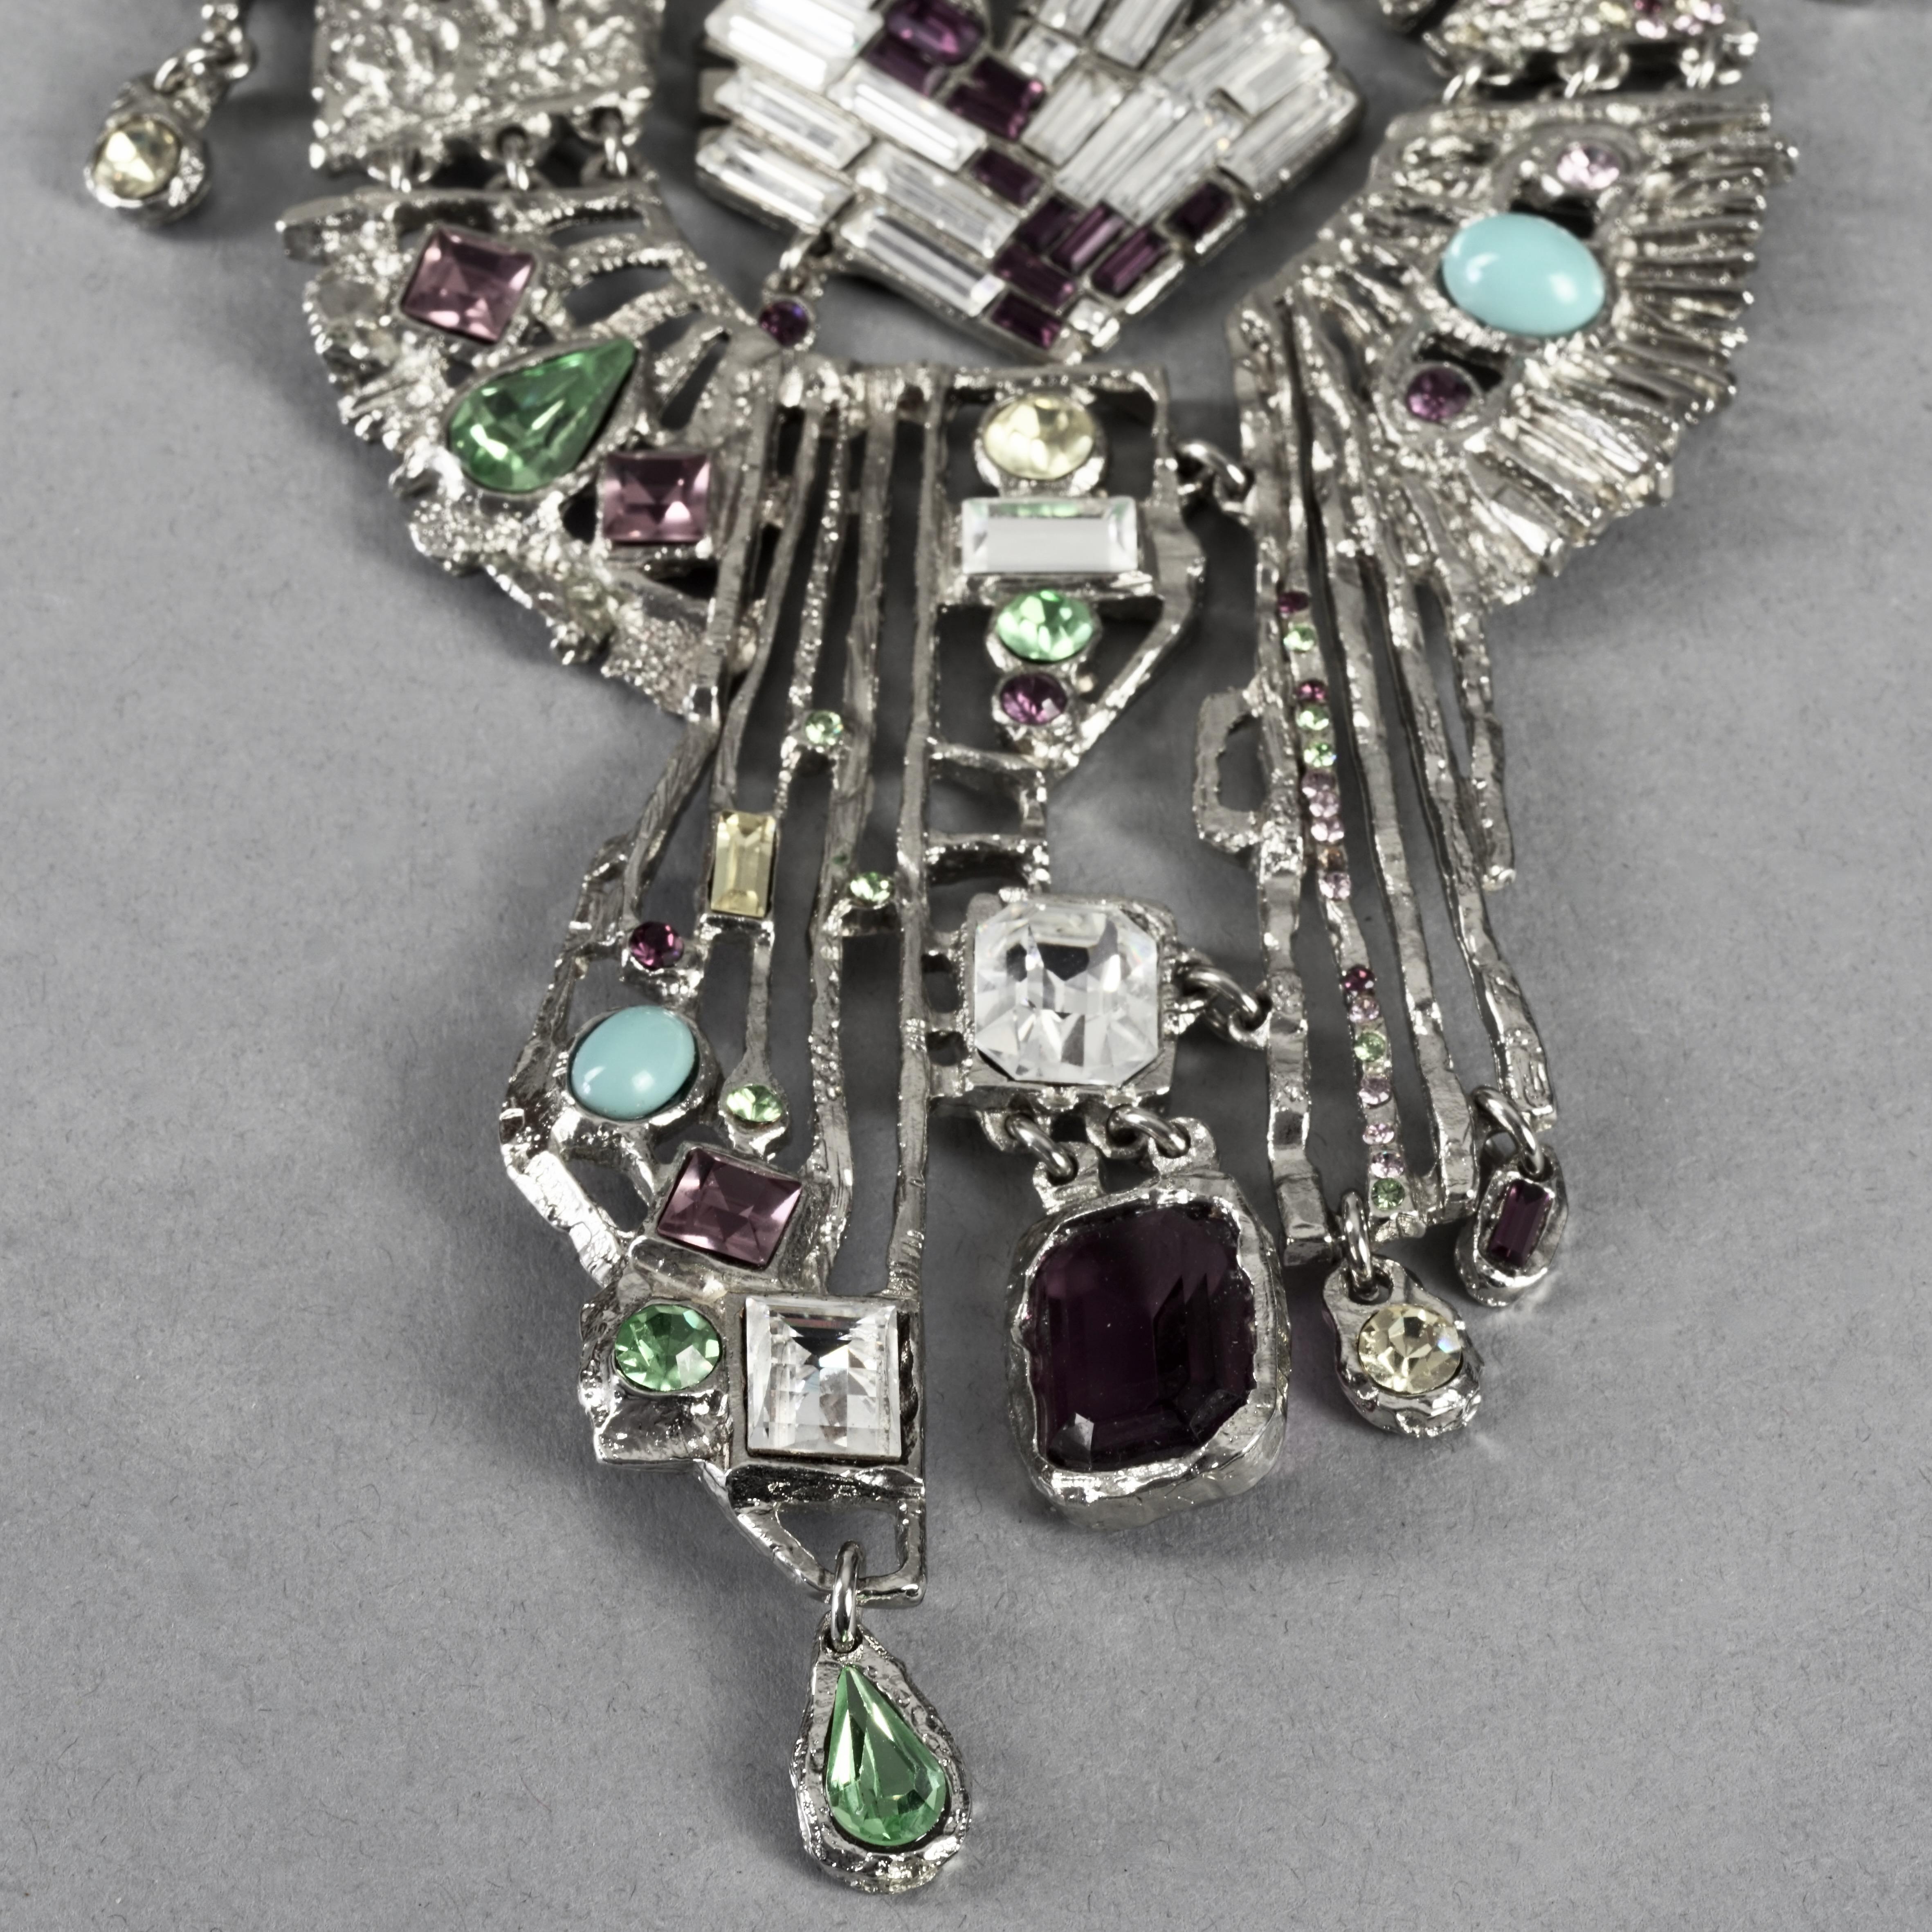 Vintage Massive CHRISTIAN LACROIX Dramatic Jewelled Cross Necklace For Sale 3